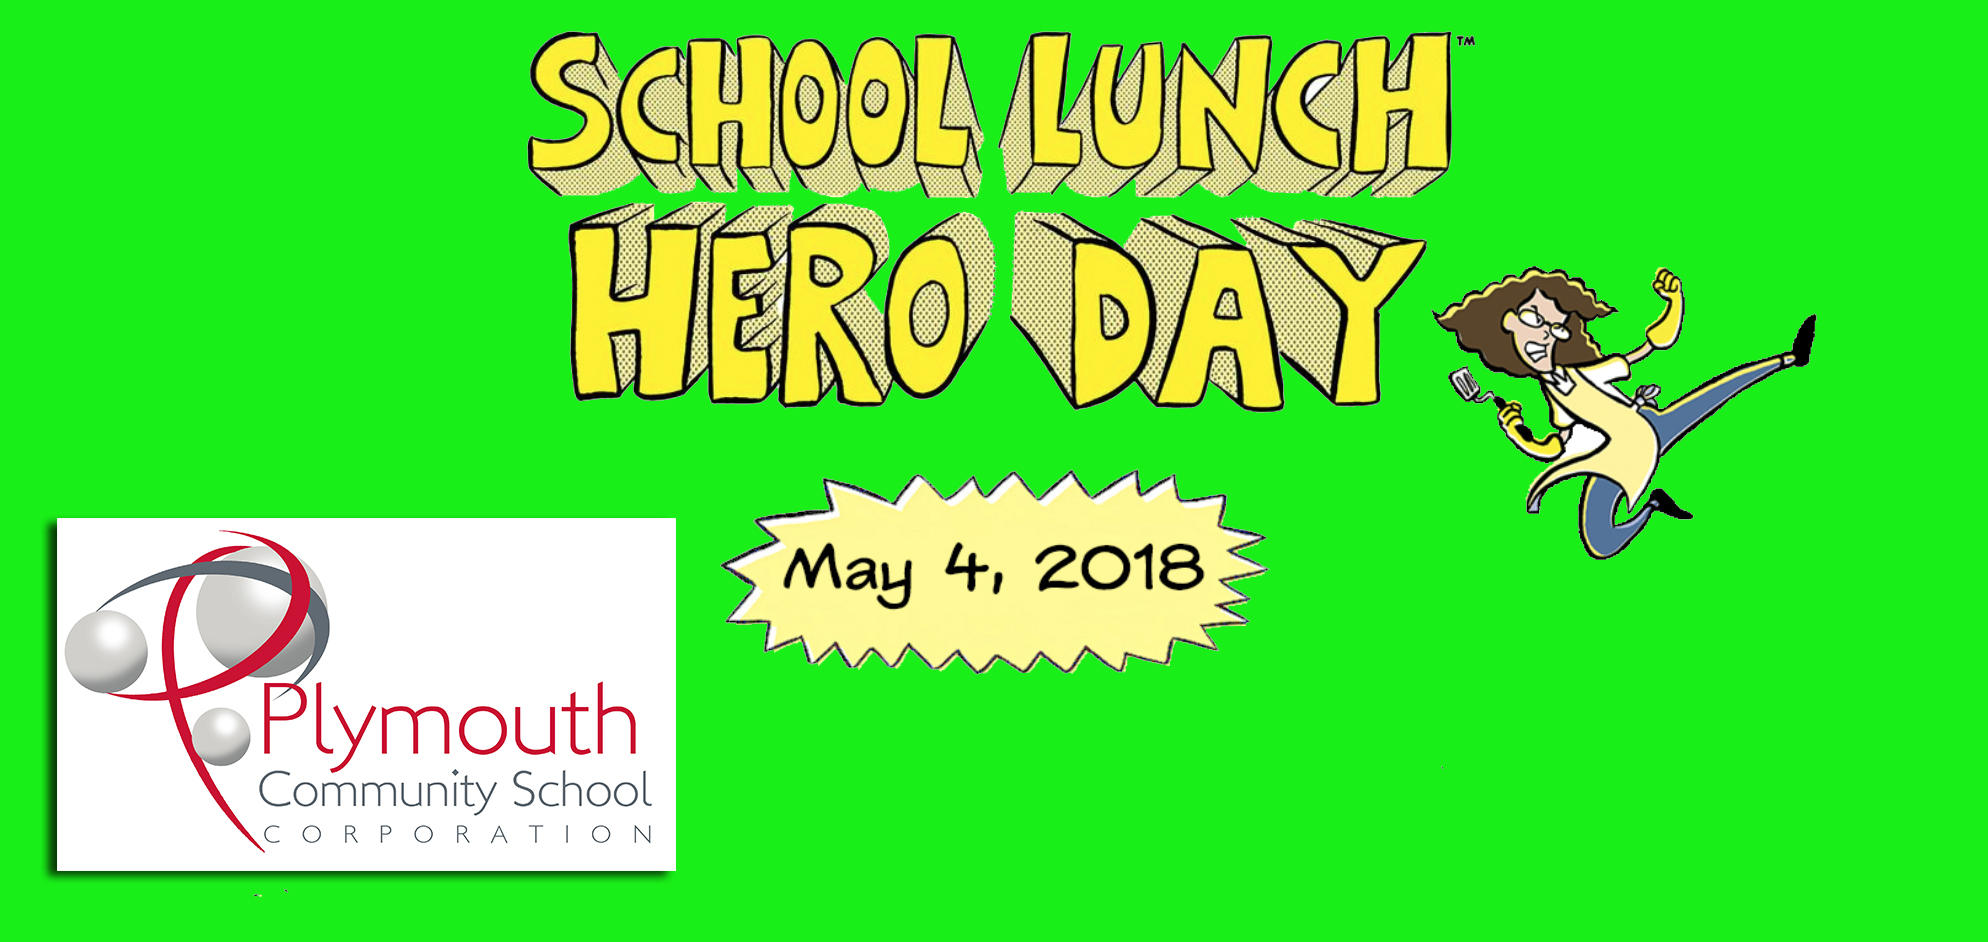 School Lunch Hero Day May 4, 2018 Plymouth Community School Corporation Logo and Lunch lady image